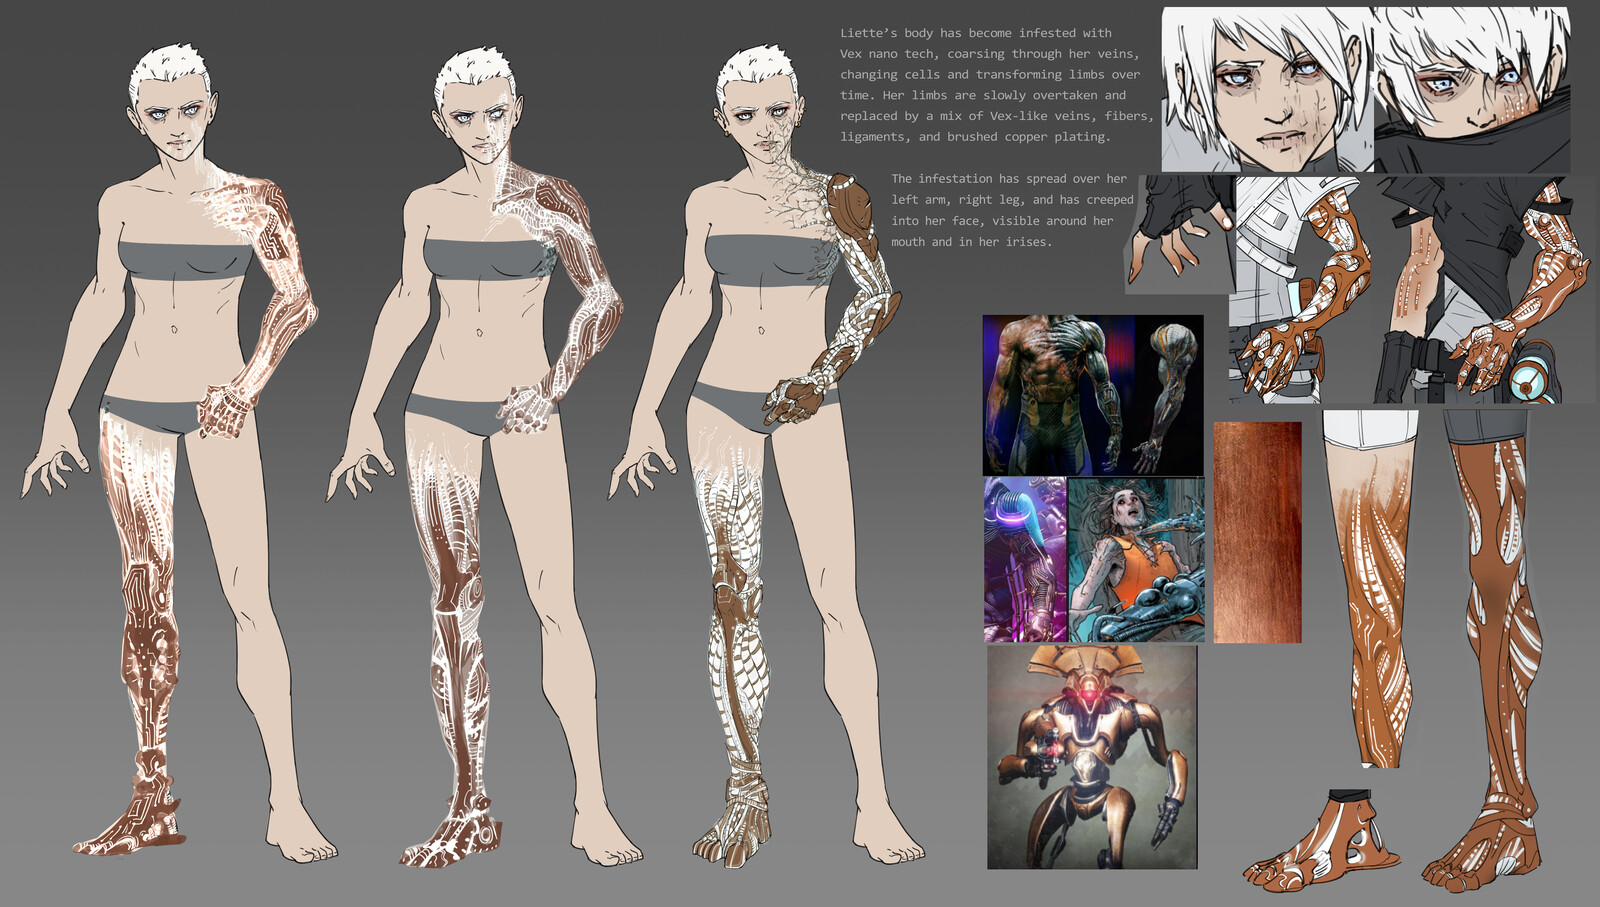 details on her synthetic parts